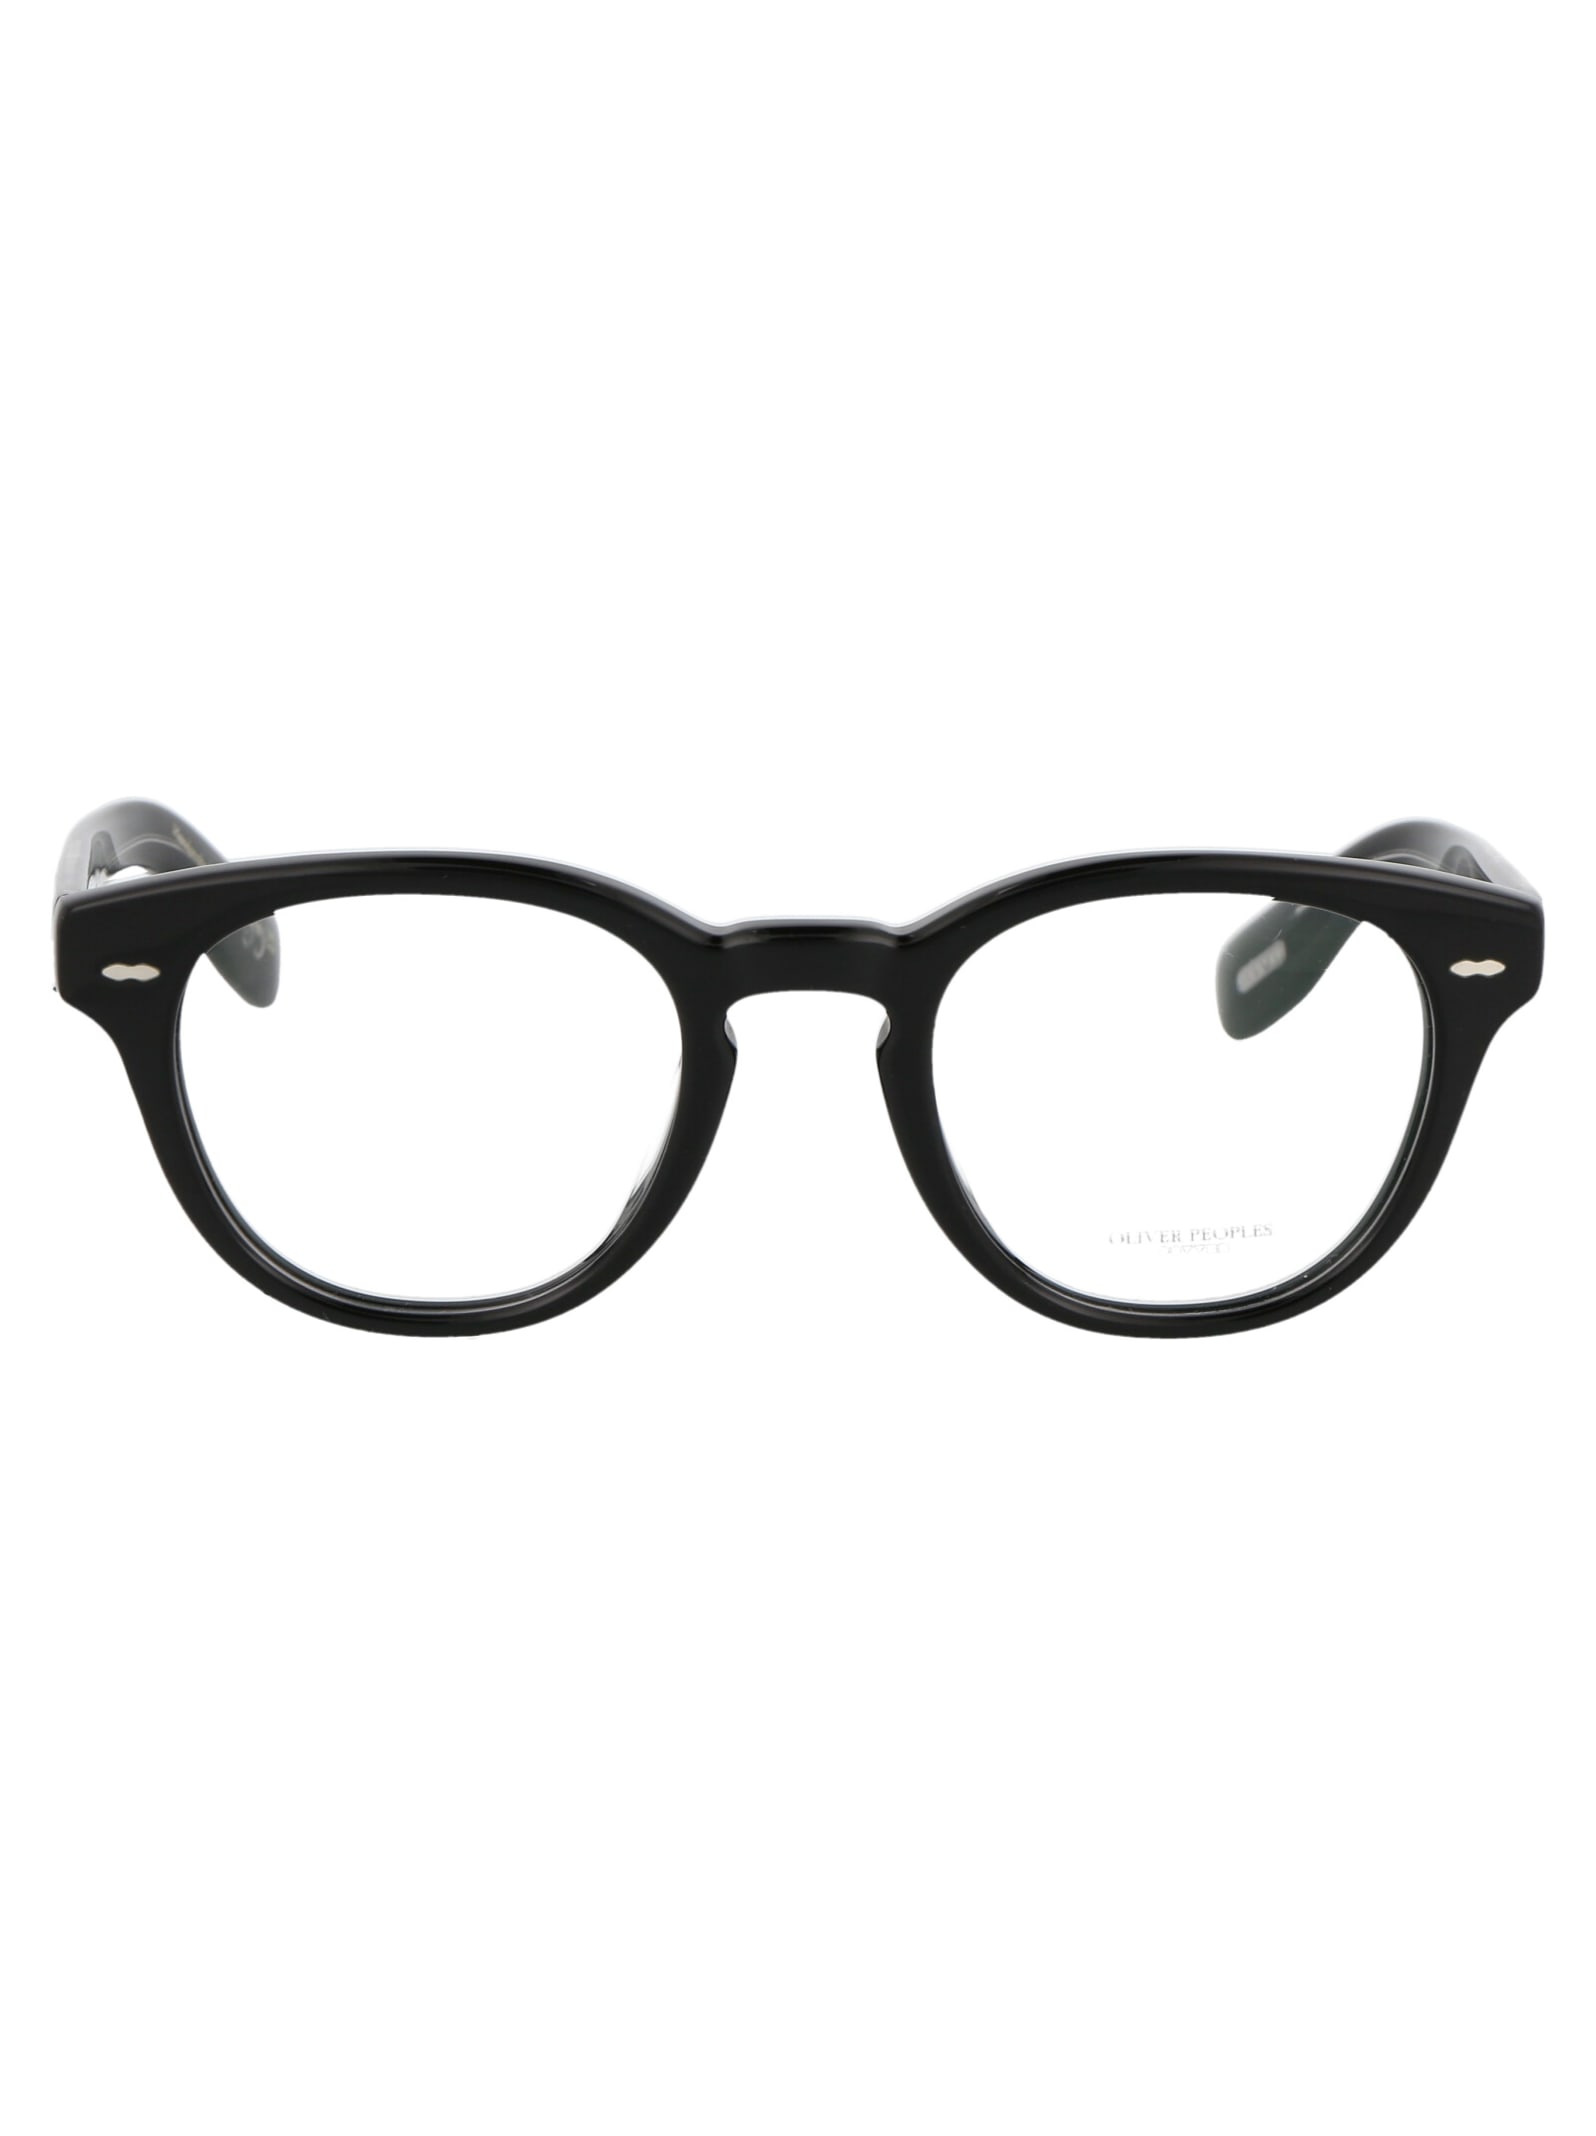 OLIVER PEOPLES CARY GRANT GLASSES